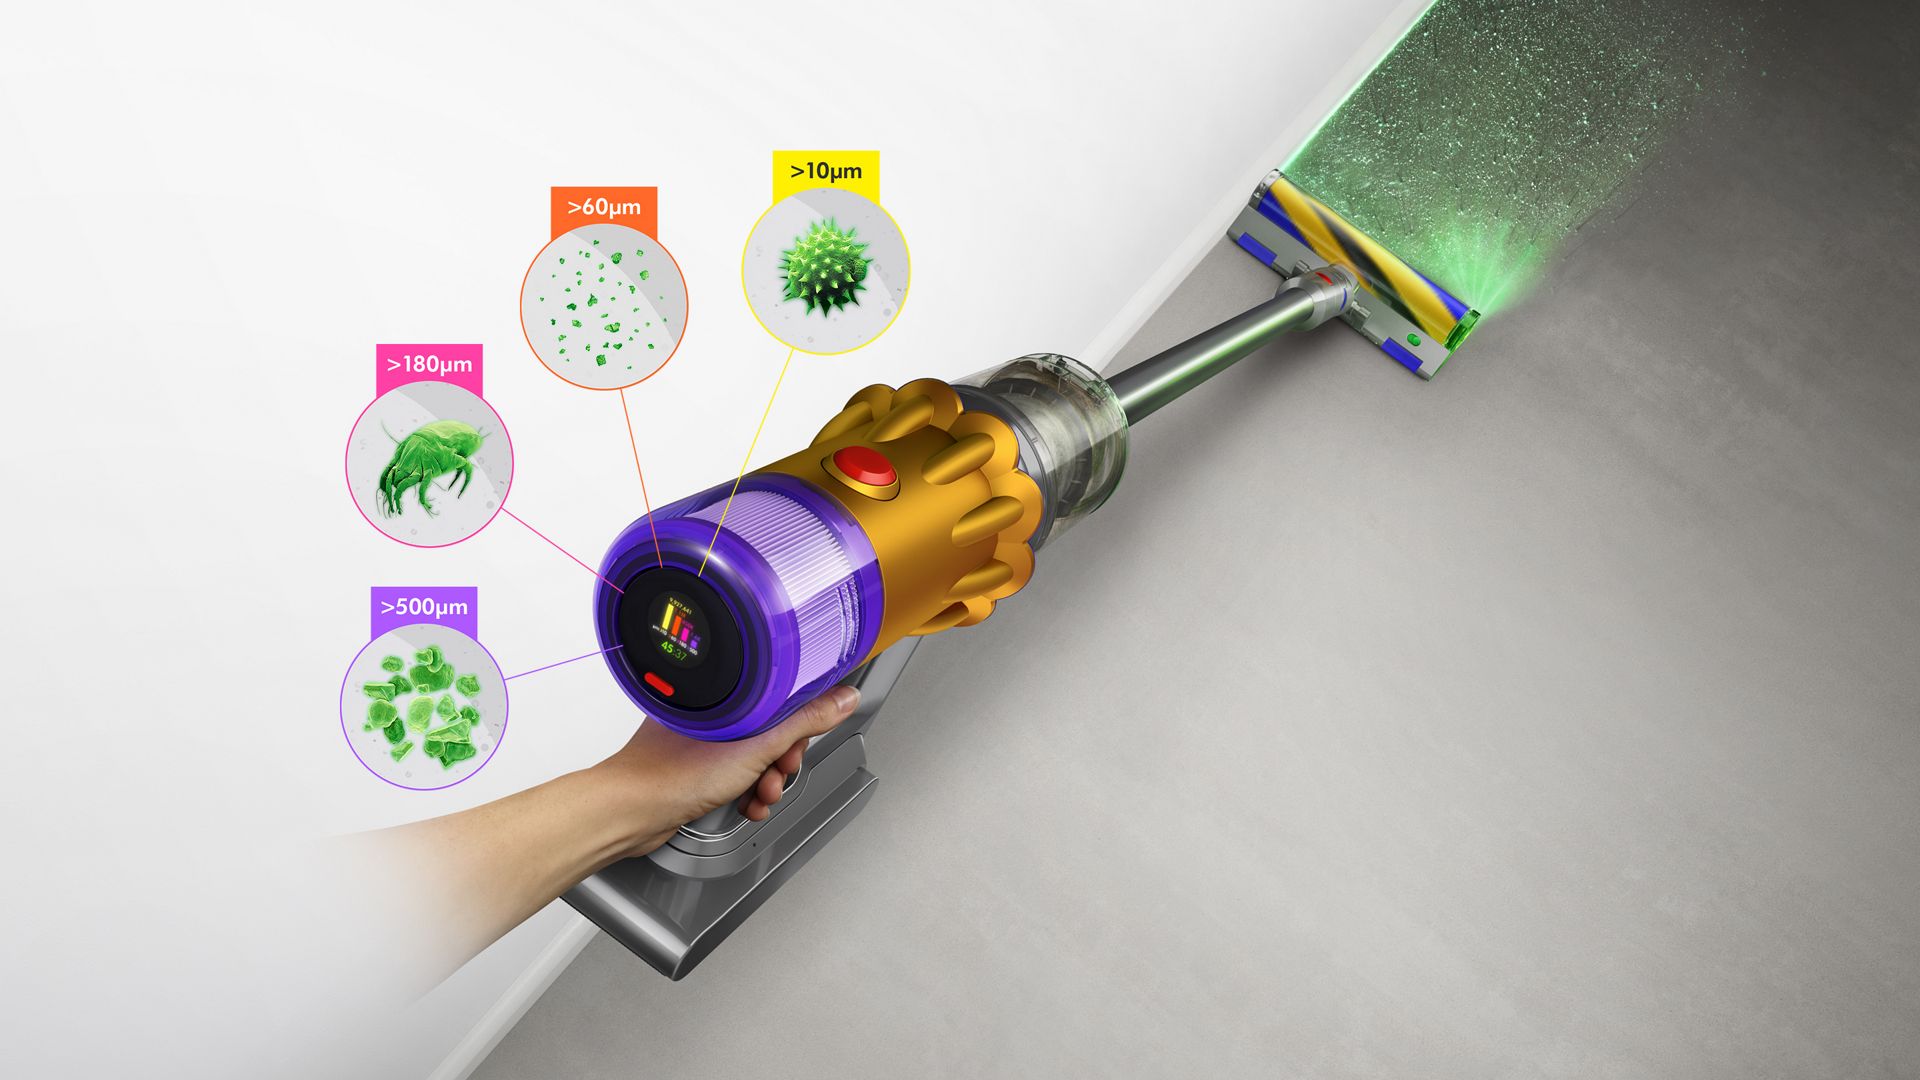 Dyson V12™ Slim Total Clean Wireless Cleaner